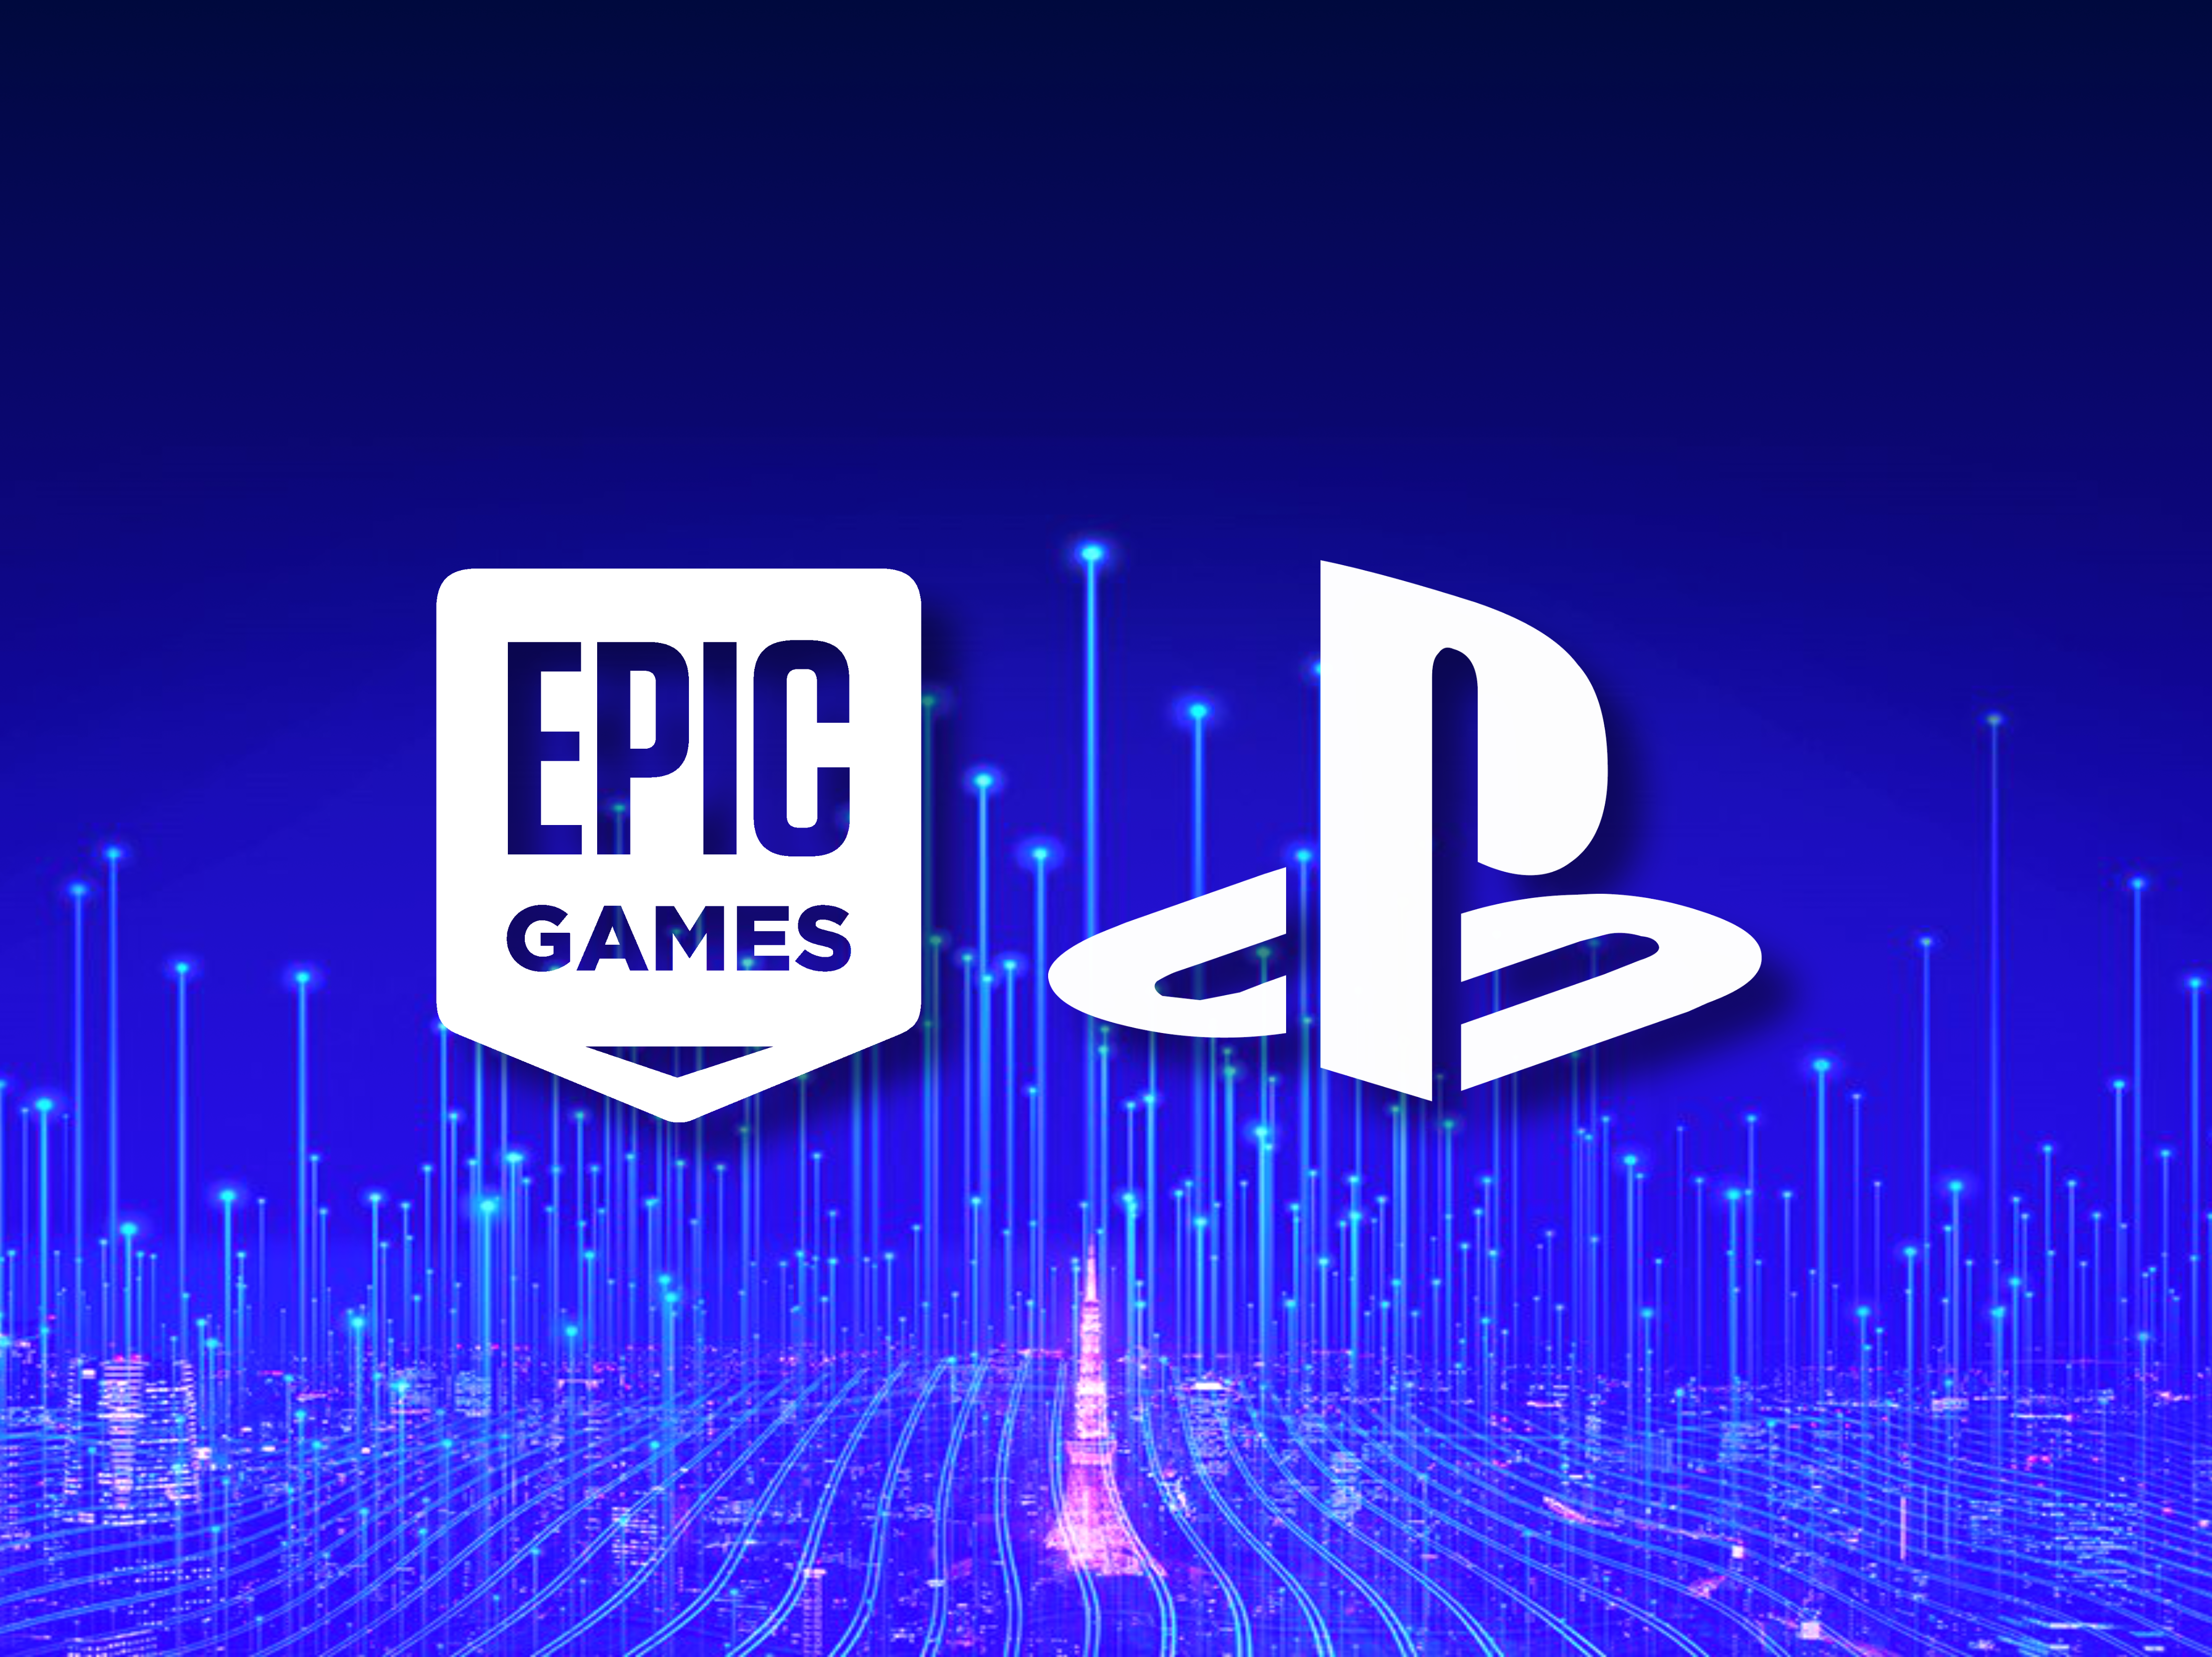 Gaming Platform Wars | Sony invests in Epic Games as hedge against Microsoft’s Xbox ecosystem